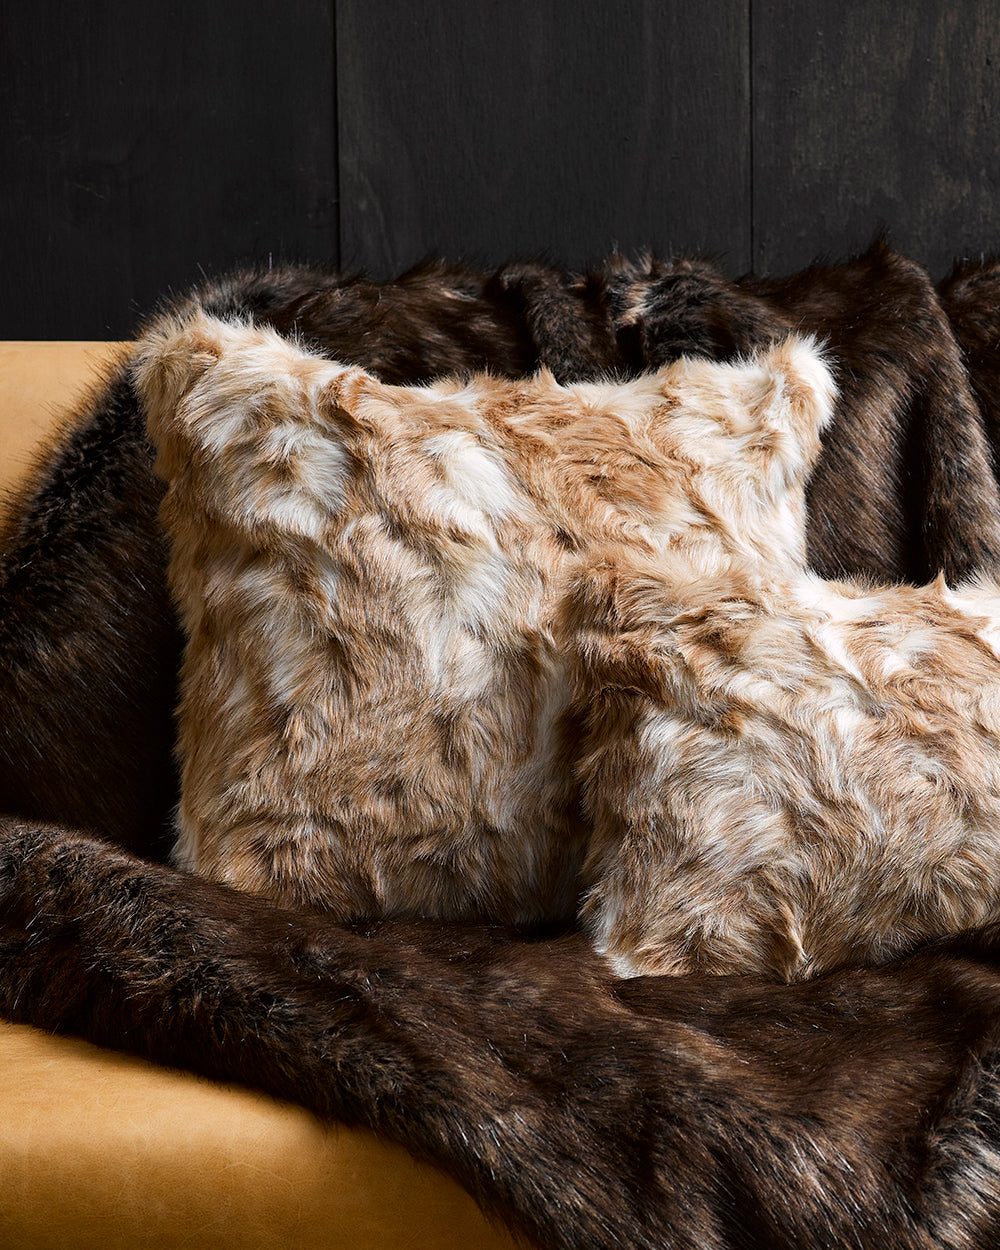 Heirloom Vintage Squirrel Fawn Cushions in Faux Fur are available from Make Your House A Home Premium Stockist. Furniture Store Bendigo, Victoria. Australia Wide Delivery. Furtex Baya.